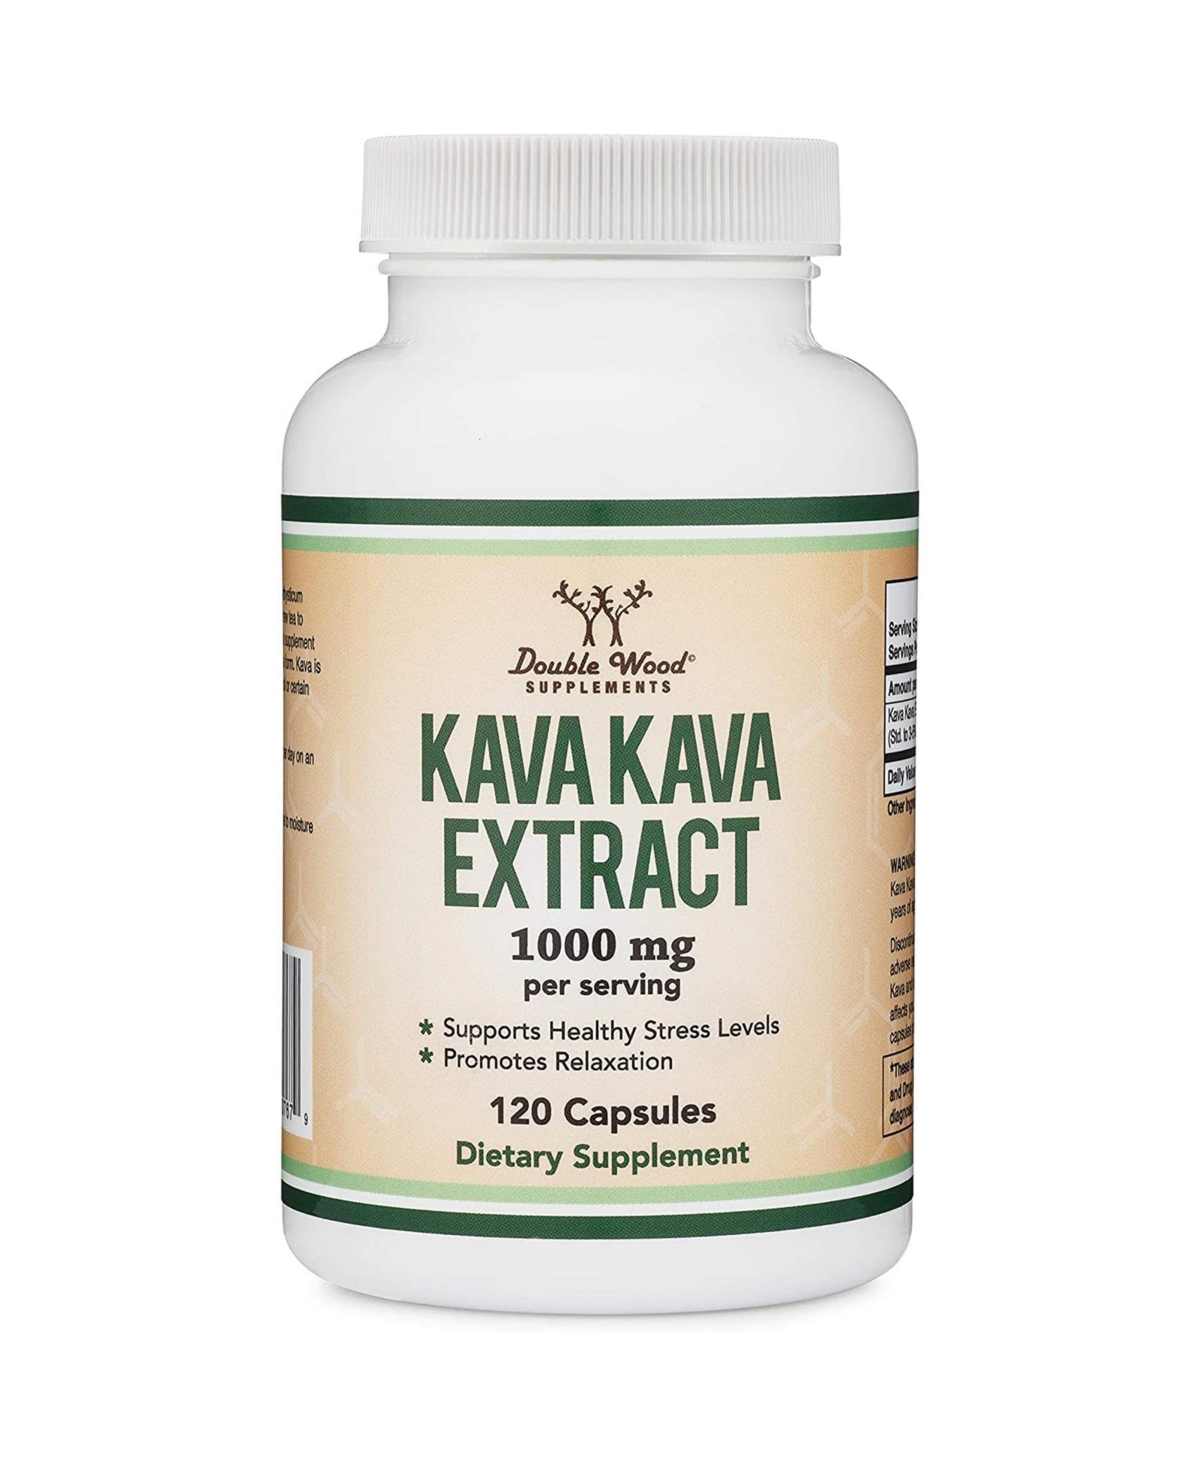 Kava Kava Extract - 120 capsules, 1000 mg servings